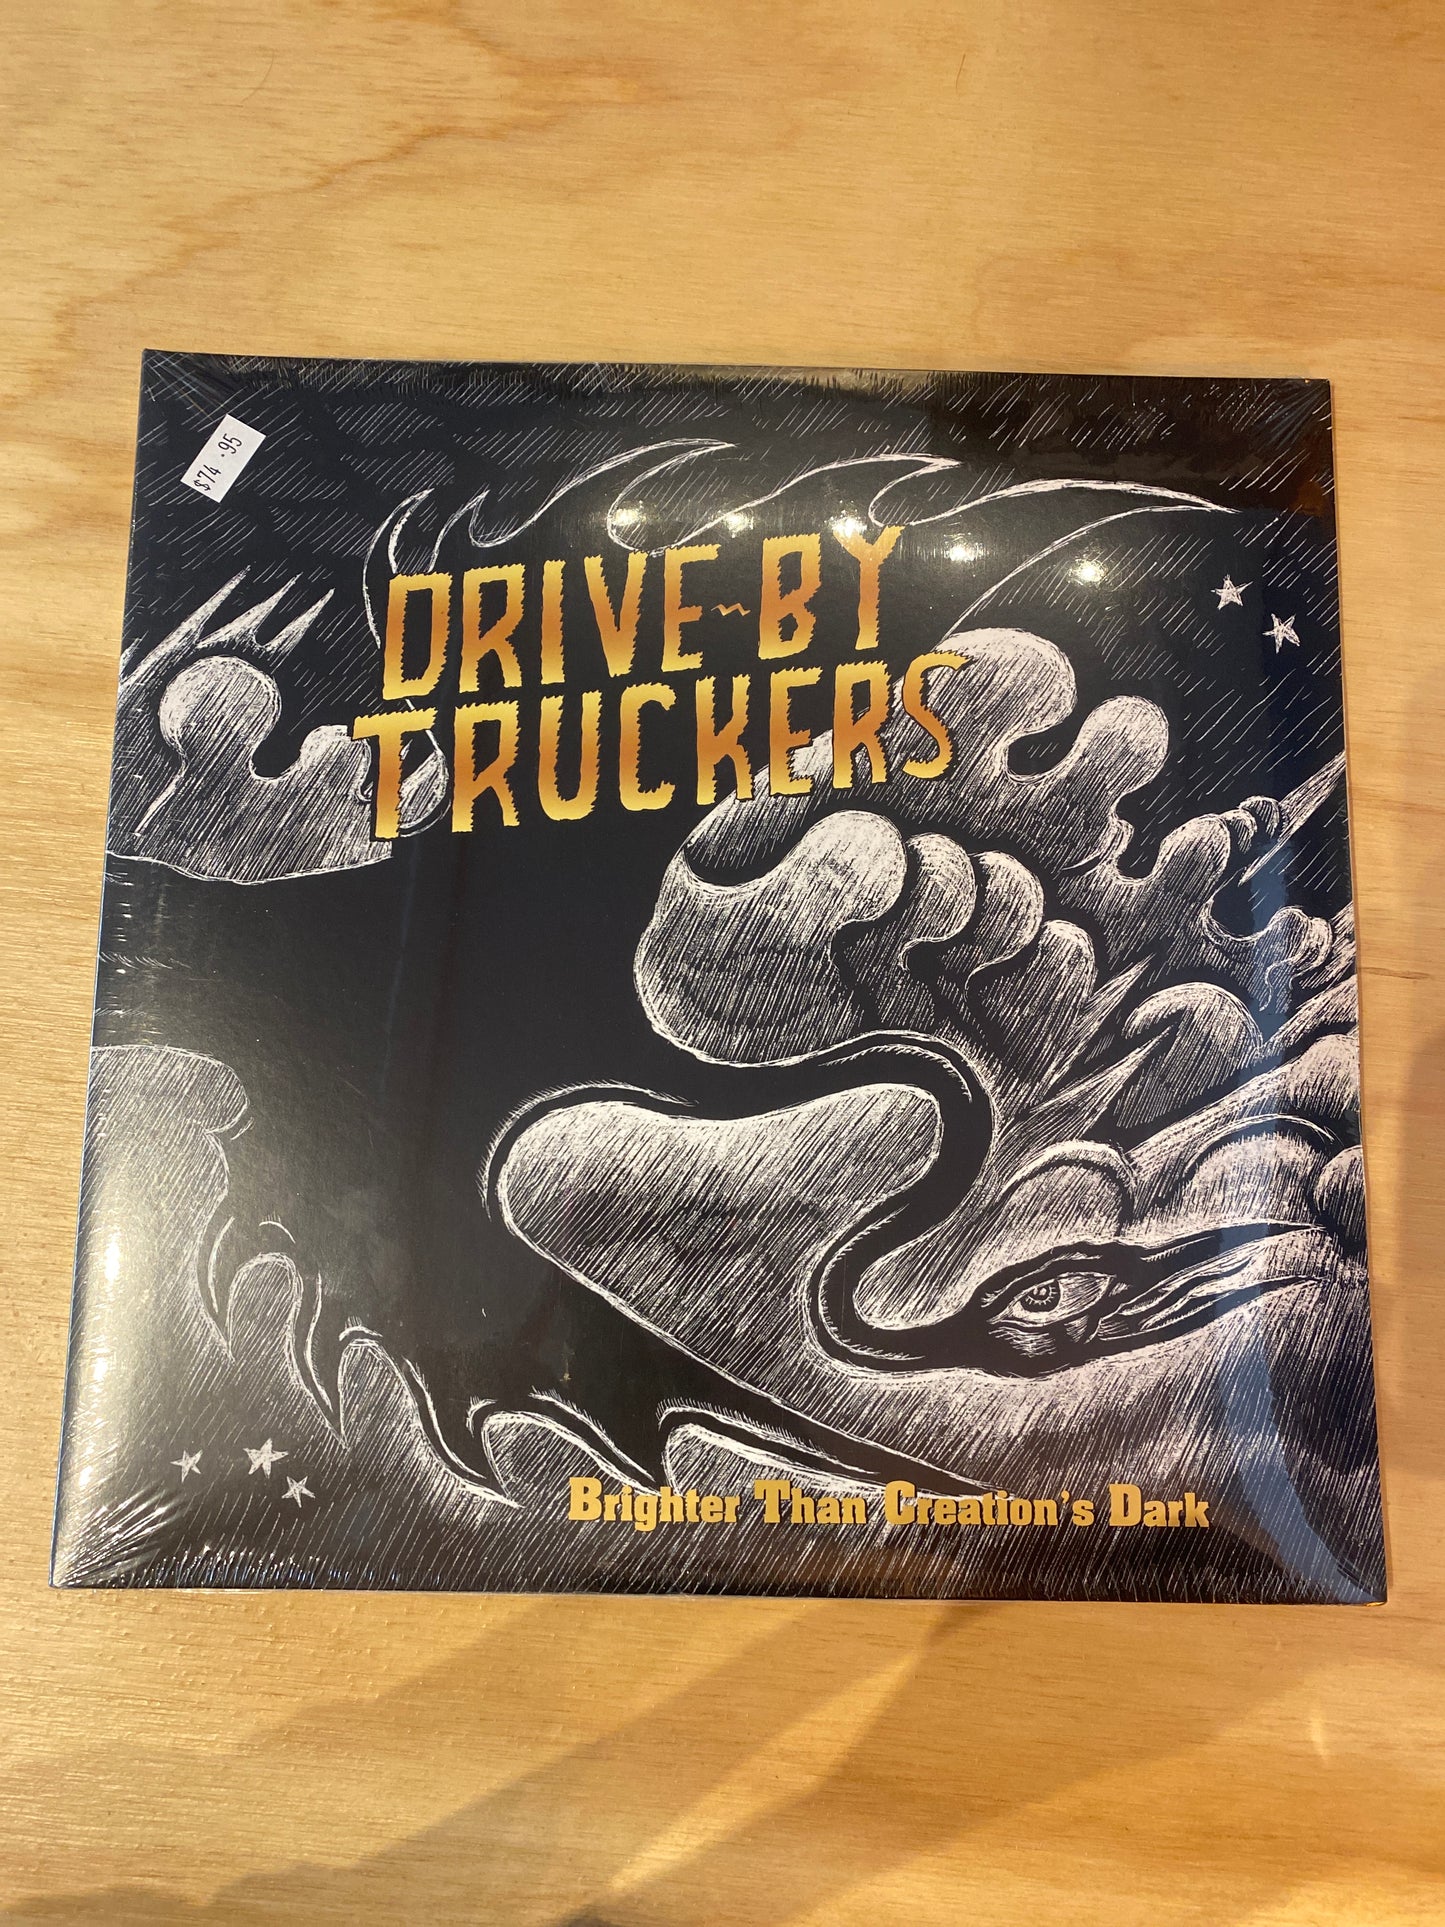 Drive-By Truckers - Brighter than Creations Dark